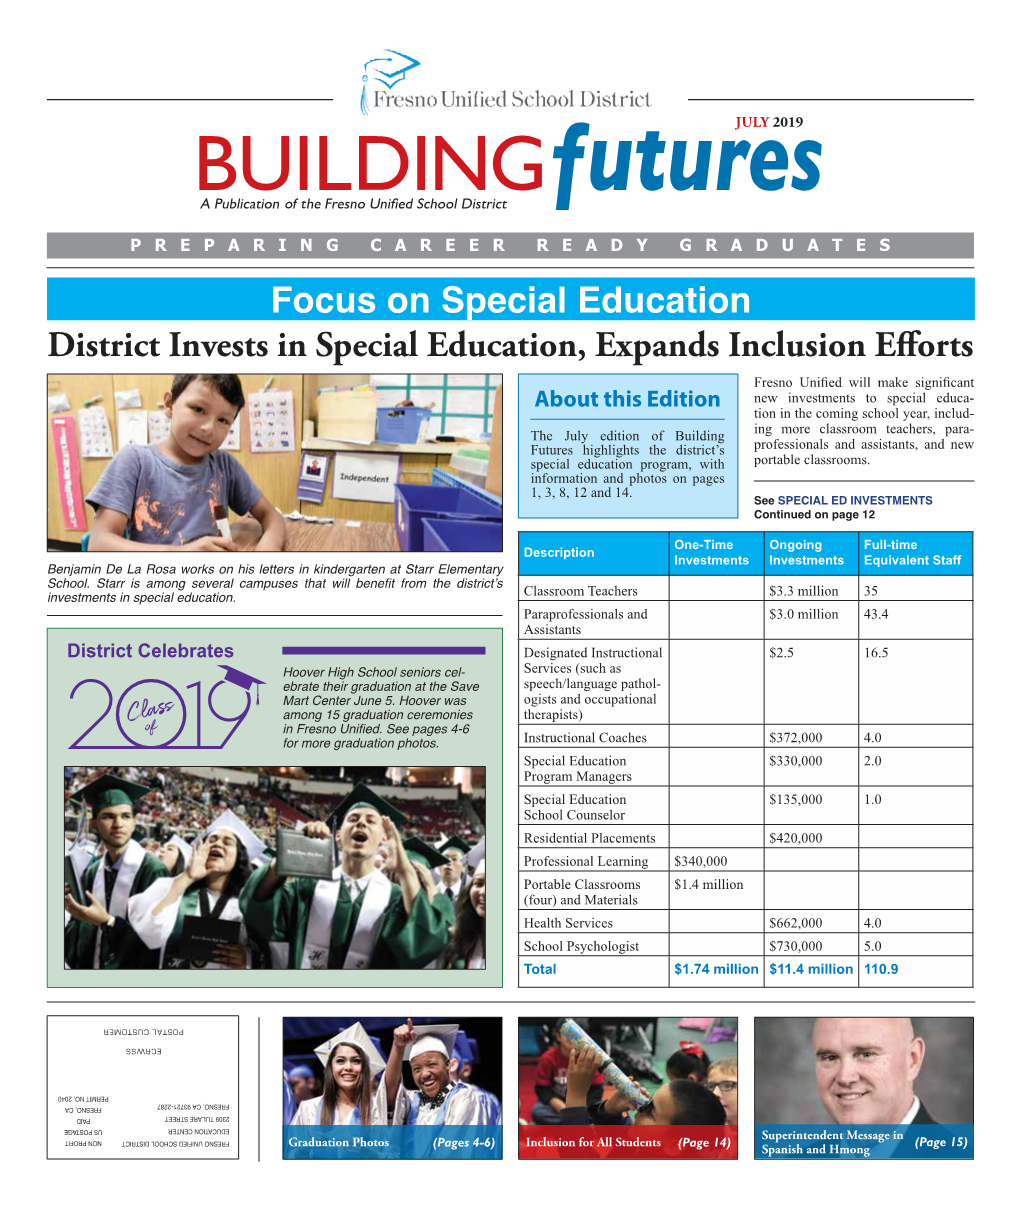 District Invests in Special Education, Expands Inclusion Efforts